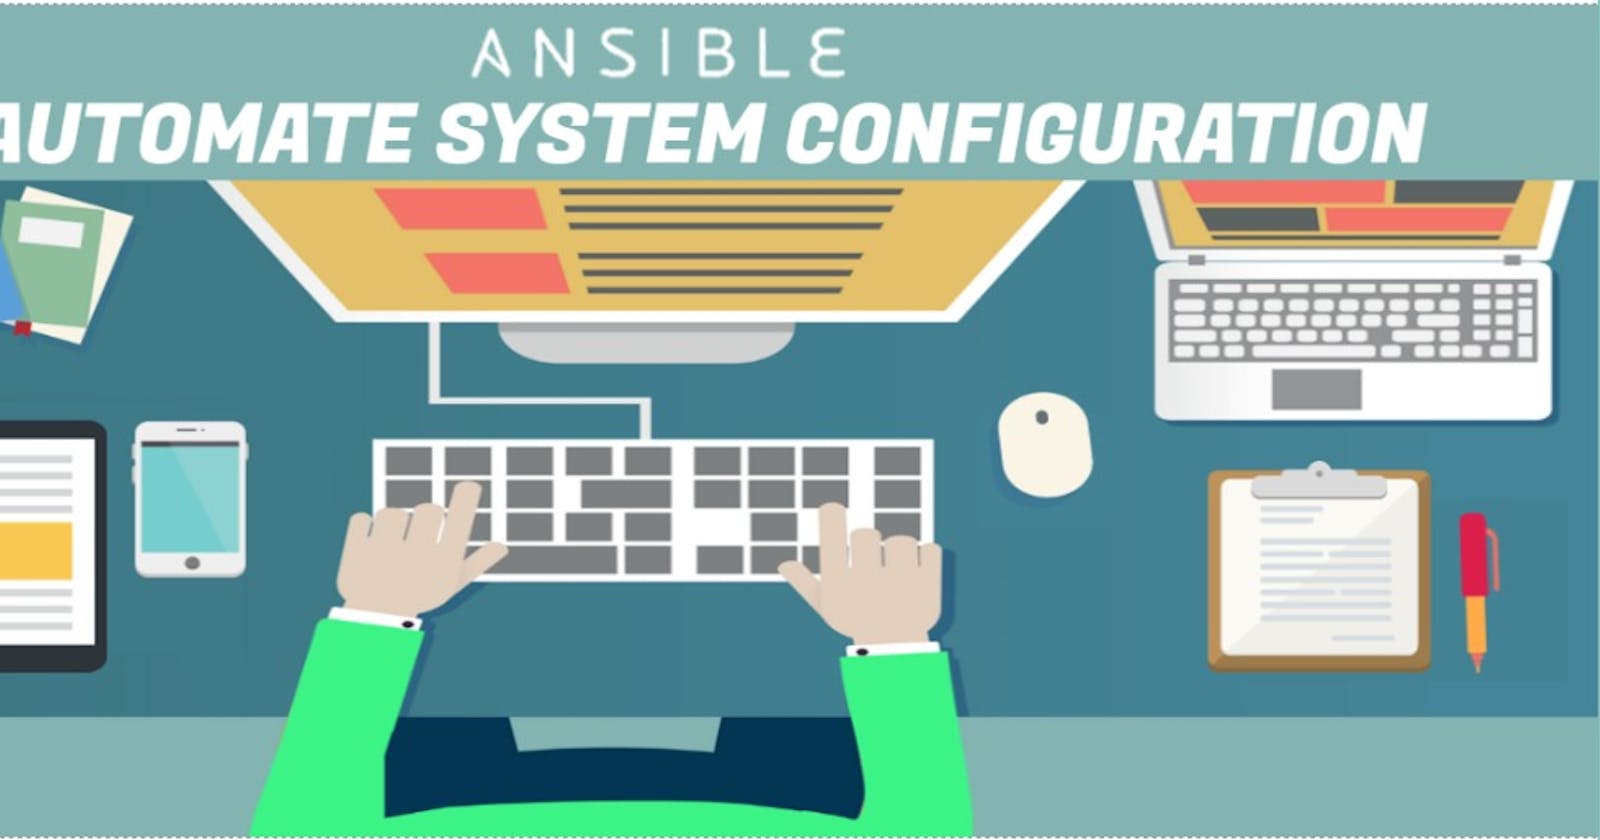 Securing a Linux server with Ansible